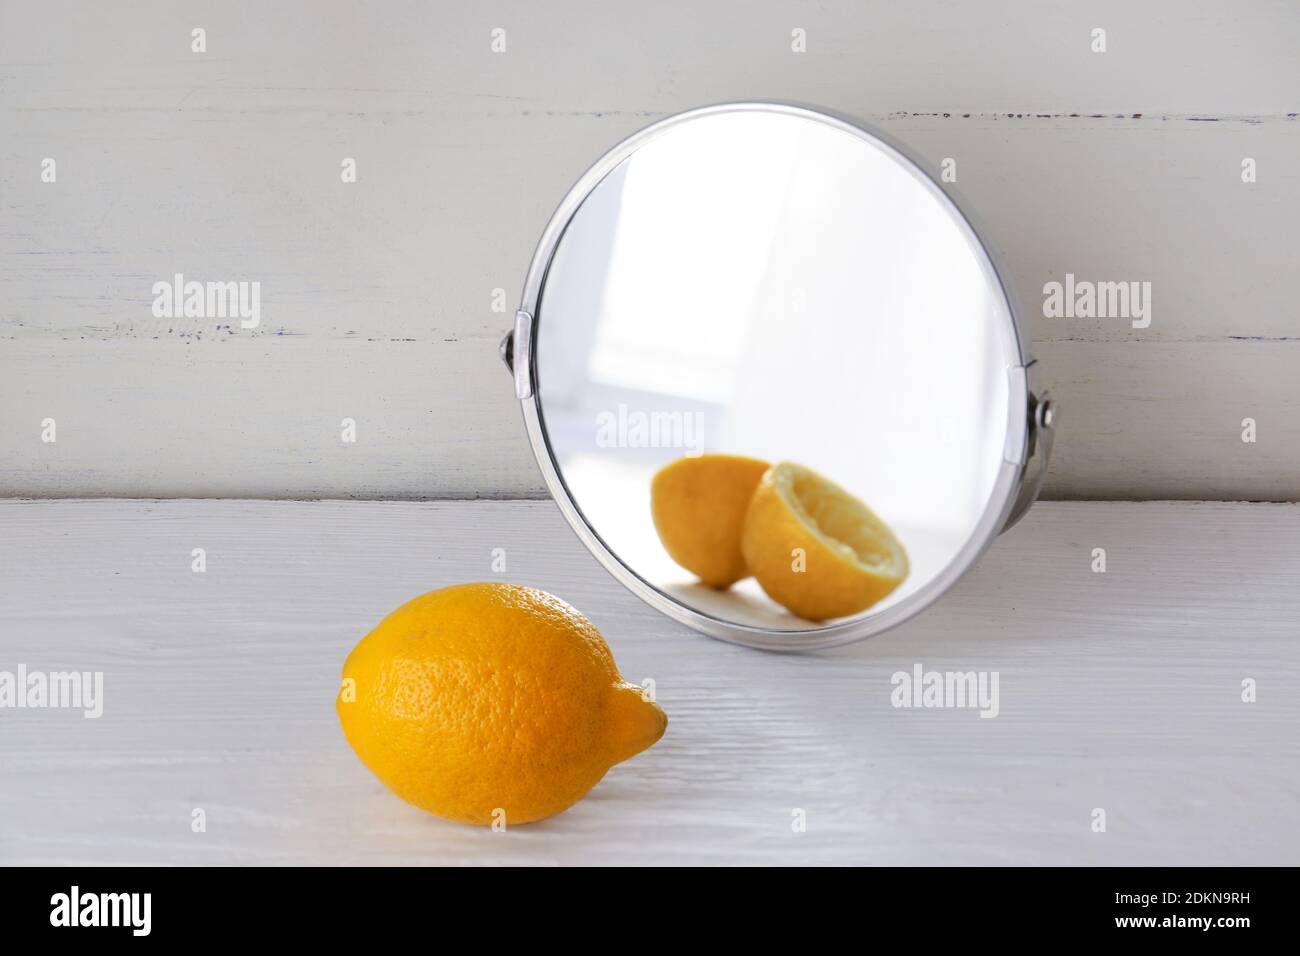 Lemon looking at its reflection in mirror on white wooden background Stock Photo